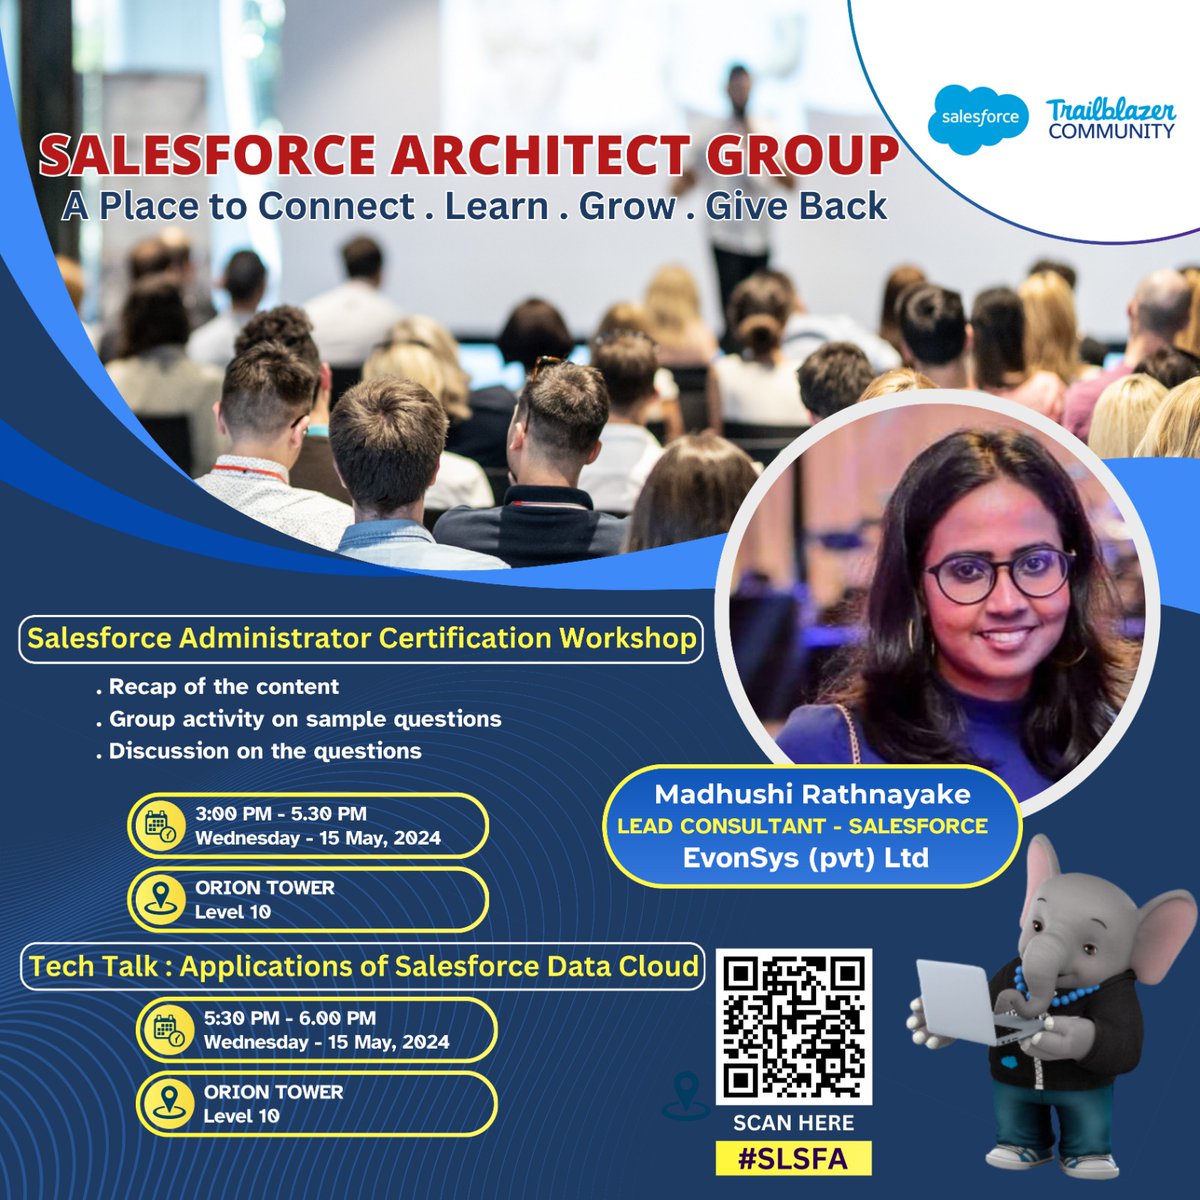 Join our Salesforce certification workshop & tech talk on May 15th, 2024!Certification session at 3:00 pm, followed by Salesforce Data Cloud insights at 5:30 pm, Led by Madhushi Rathnayake, Lead Consultant at EvonSys.
RSVP: tinyurl.com/SLSFA2
 #Salesforce  #DataCloud #SLSFA